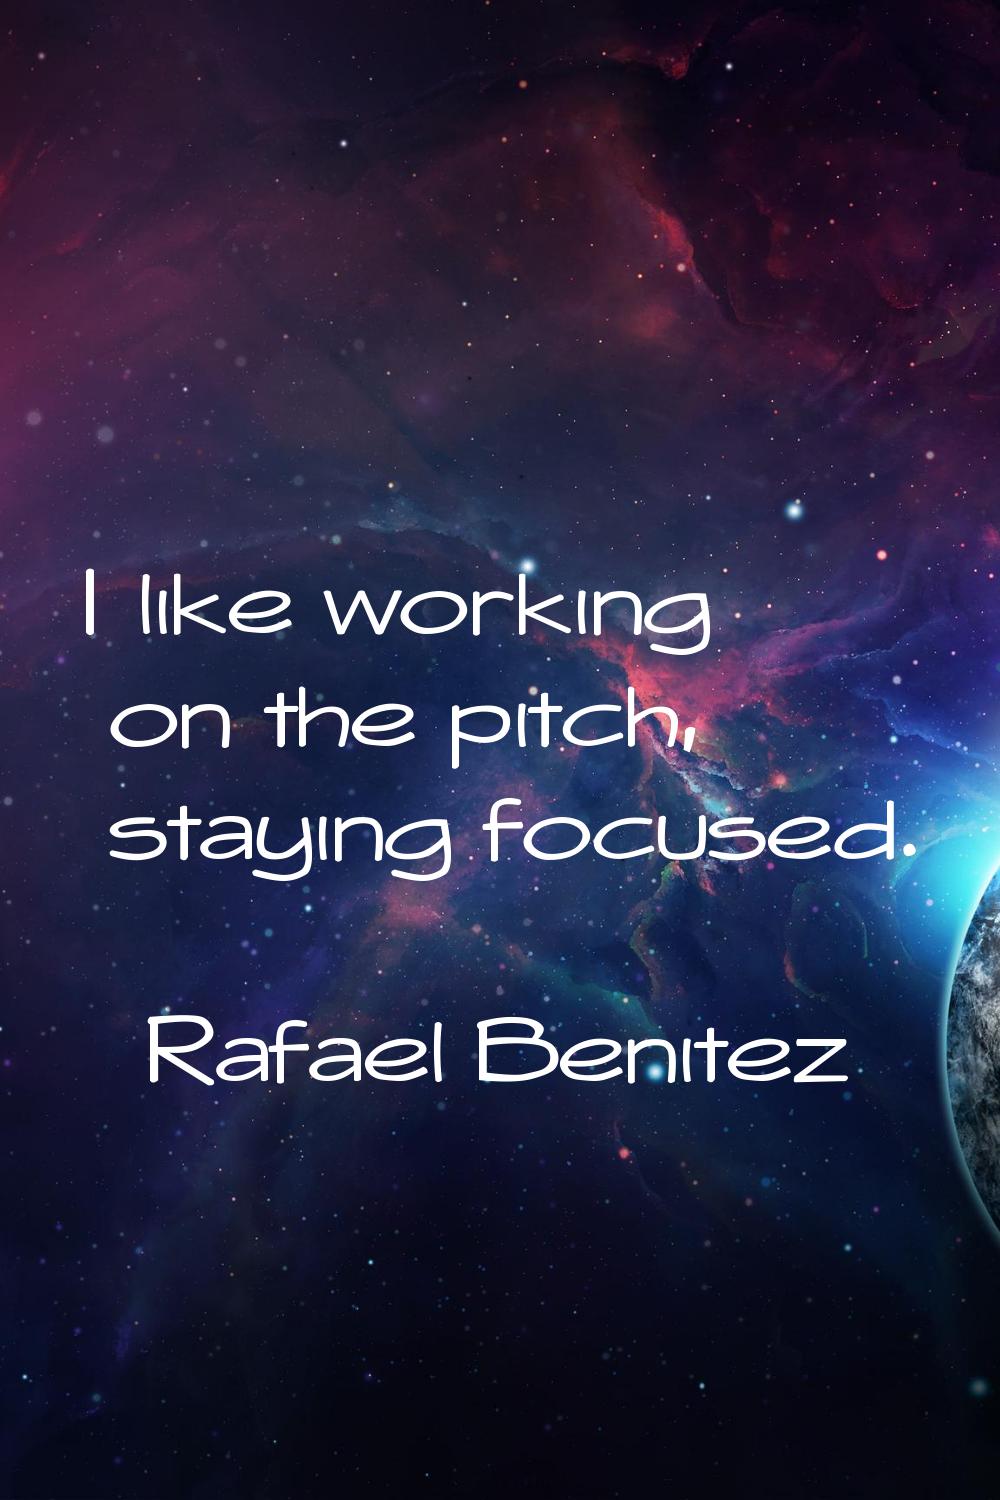 I like working on the pitch, staying focused.